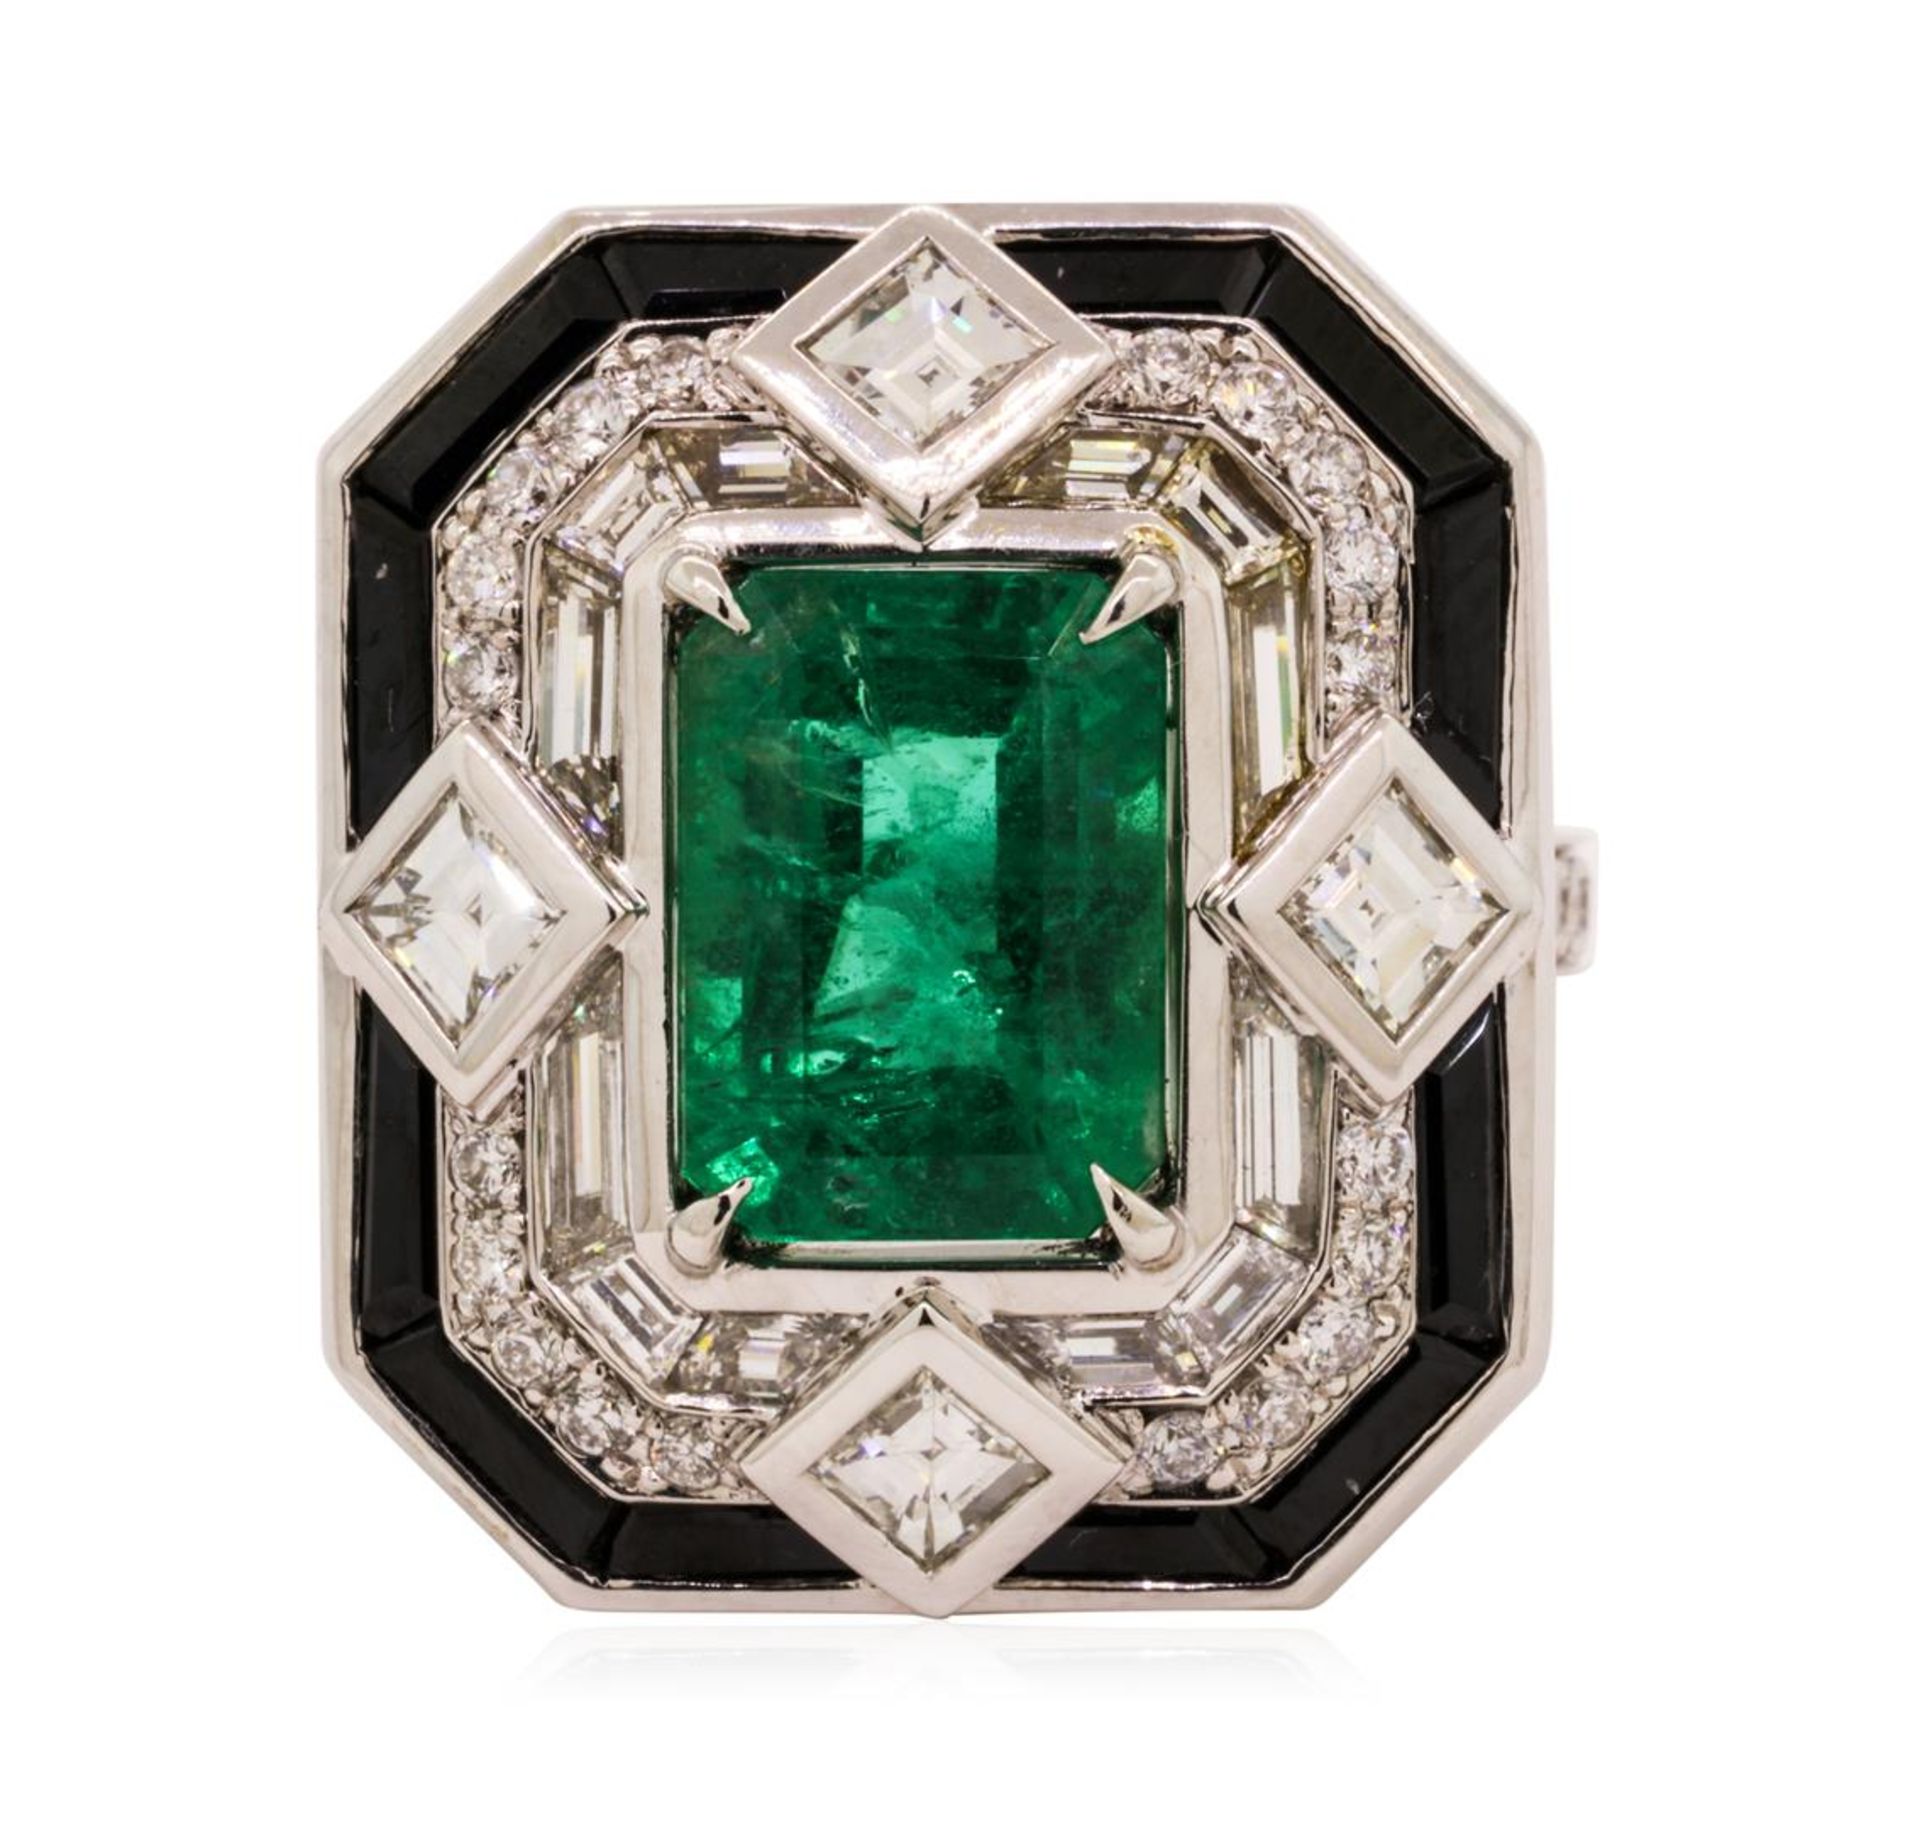 6.46 ctw Emerald and Diamond Ring - 18KT White Gold - Image 2 of 6